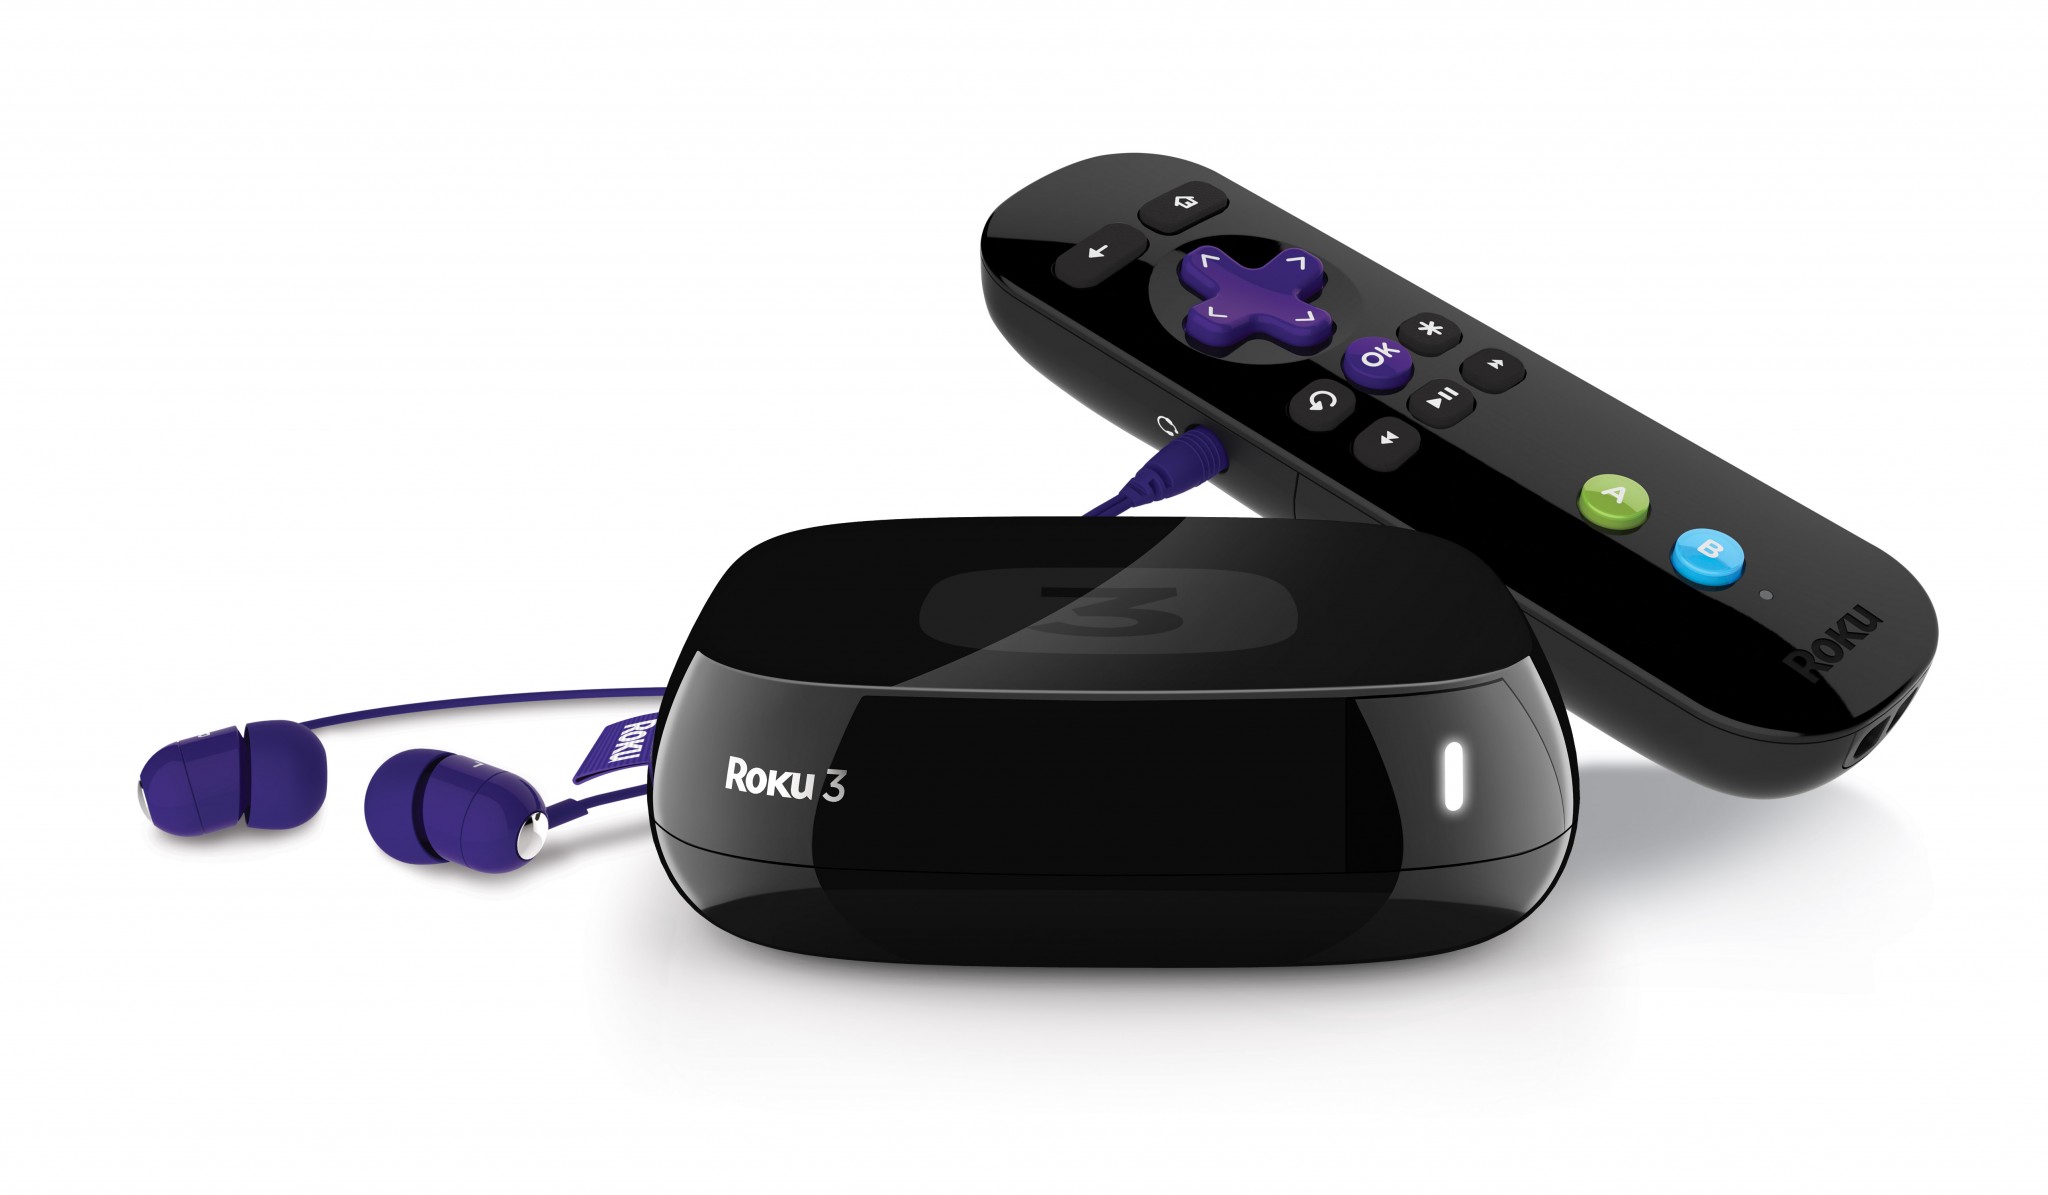 Sale: Roku 3 with Voice Search $89, LG LED 42-Inch TV Only $348, Fire TV Stick only $34, & The New Roku 2 Only $59.99